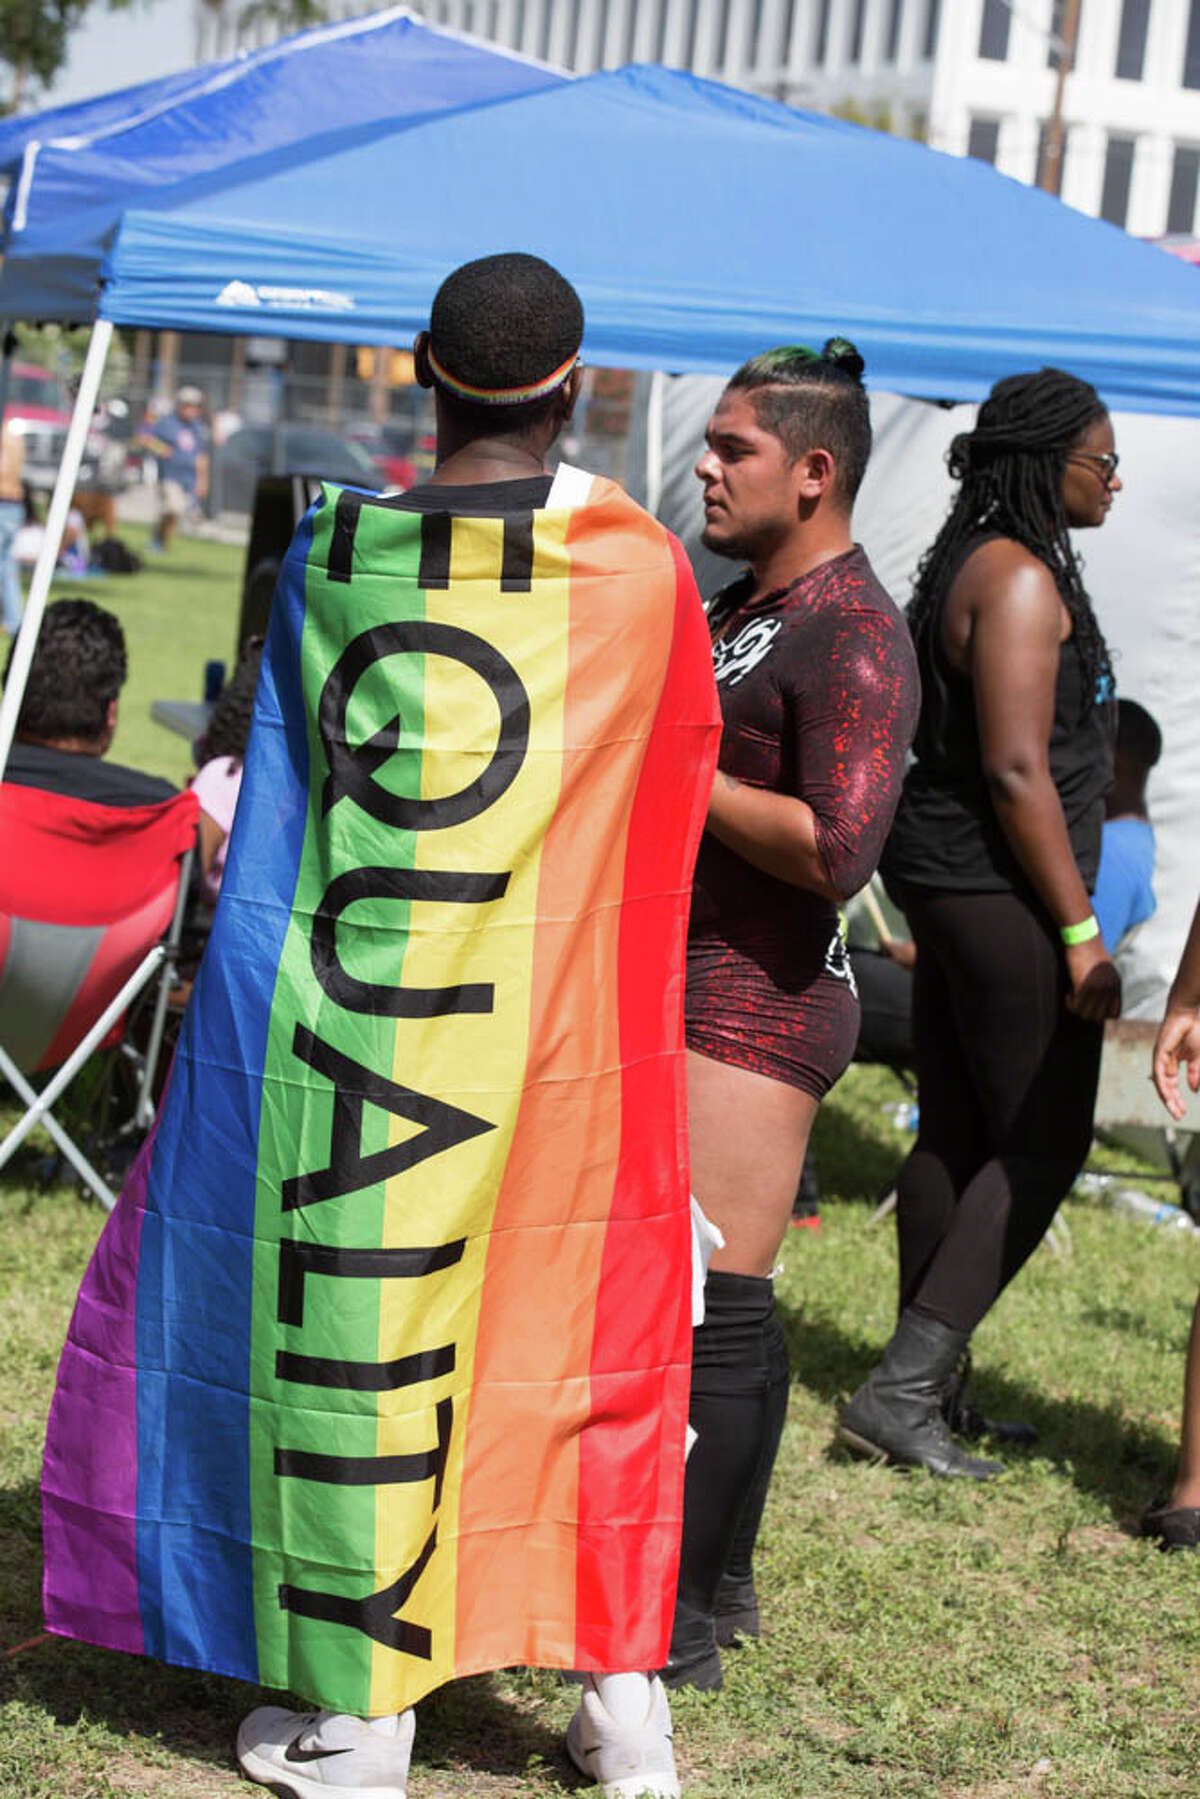 San Antonio Pride is still Bigger Than Texas. Here's how to celebrate